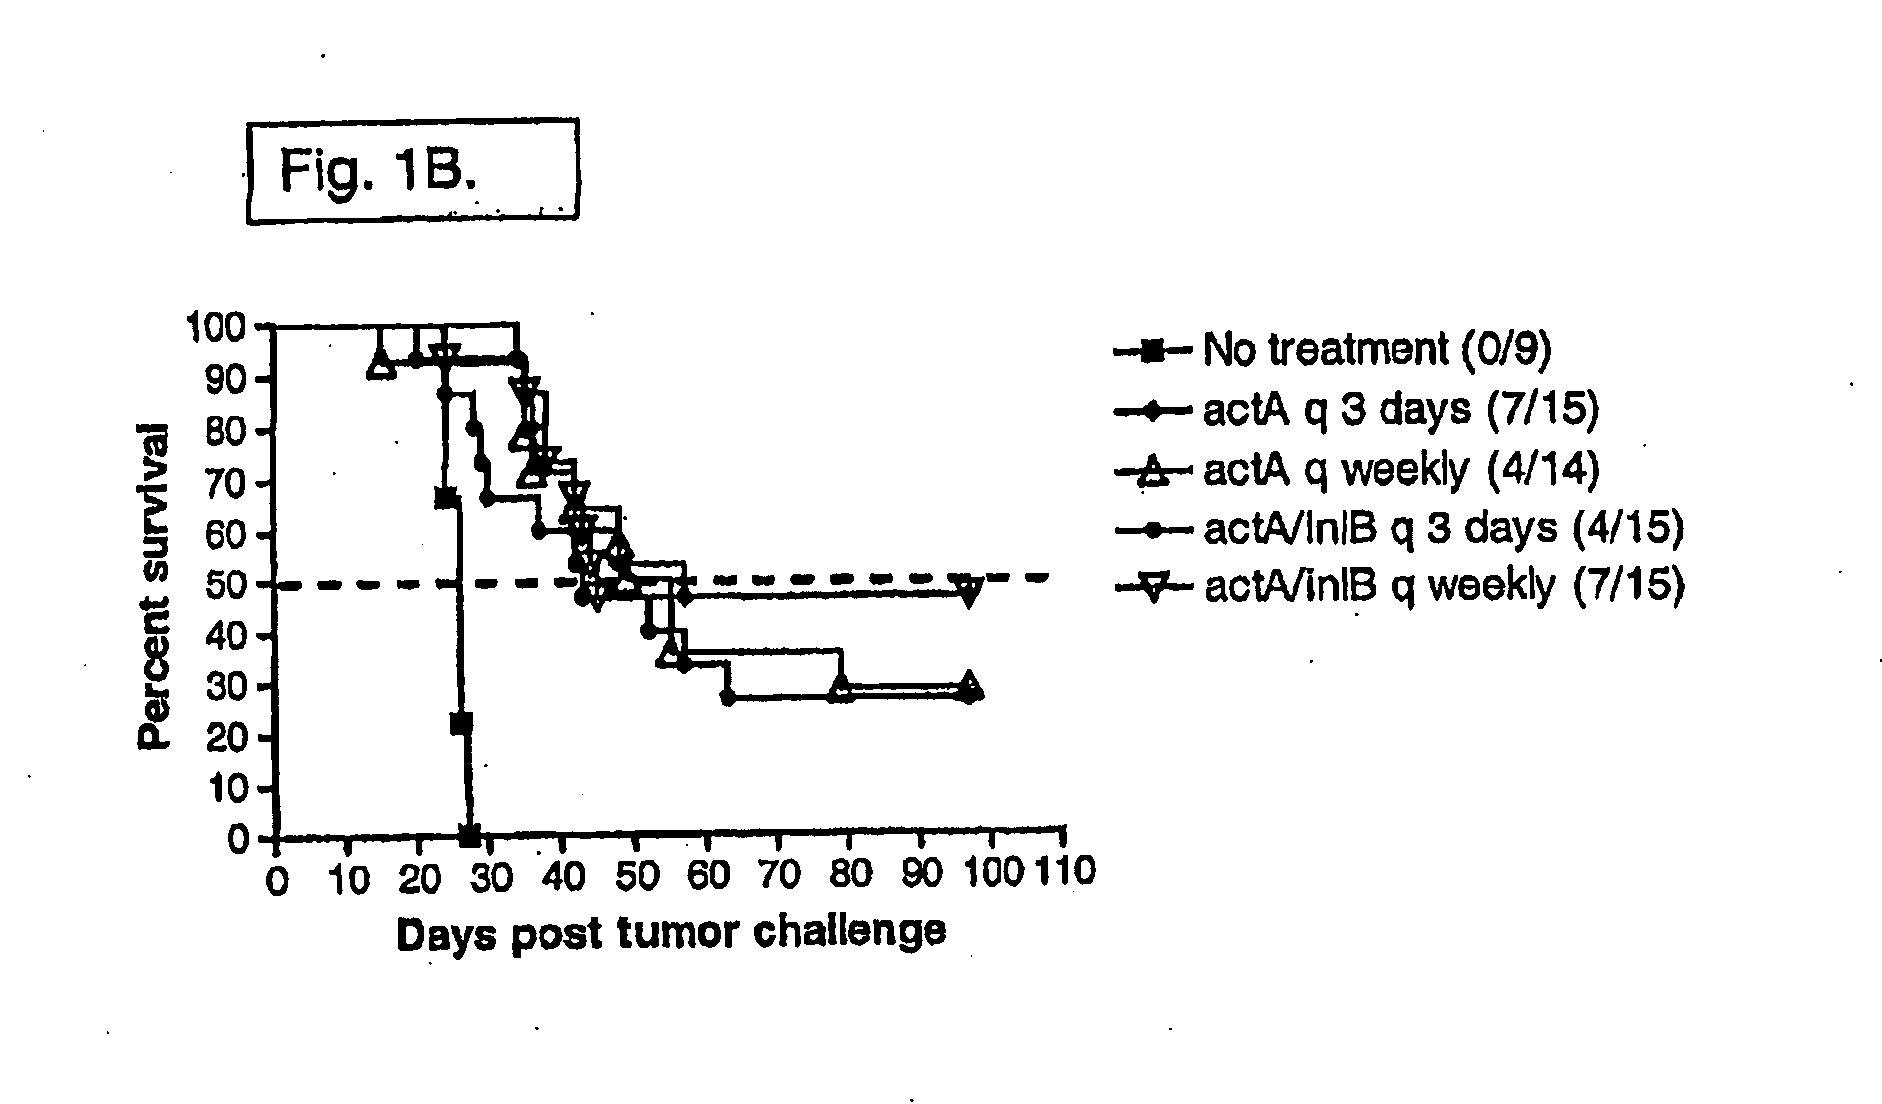 Listeria-induced immunorecruitment and activation, and methods of use thereof